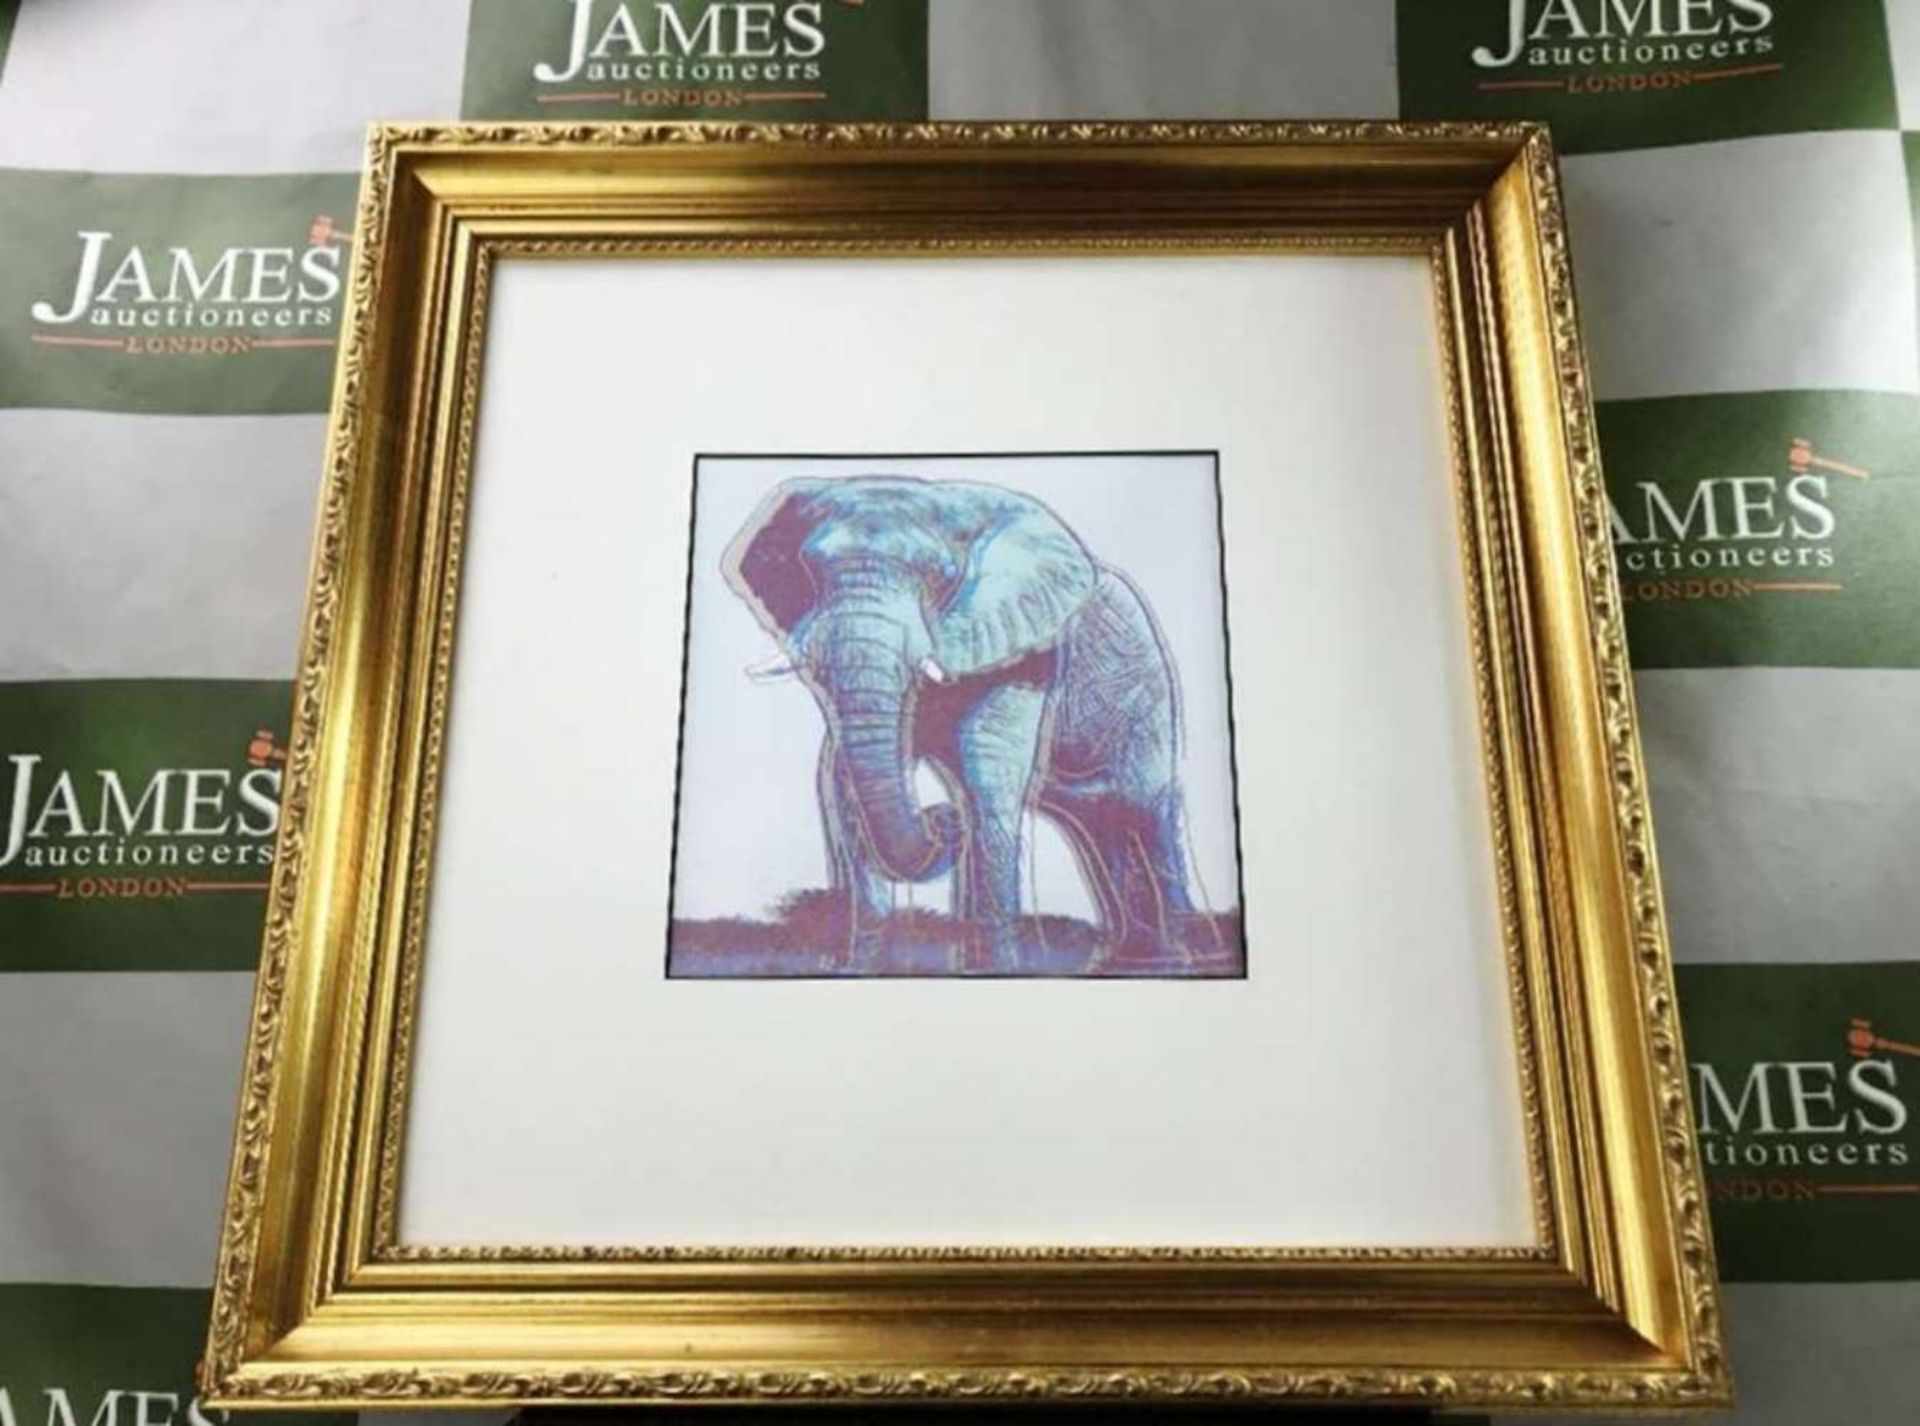 Andy Warhol (1928-1987) "The Elephant " 1987 Ltd Edition Lithograph - Image 3 of 3